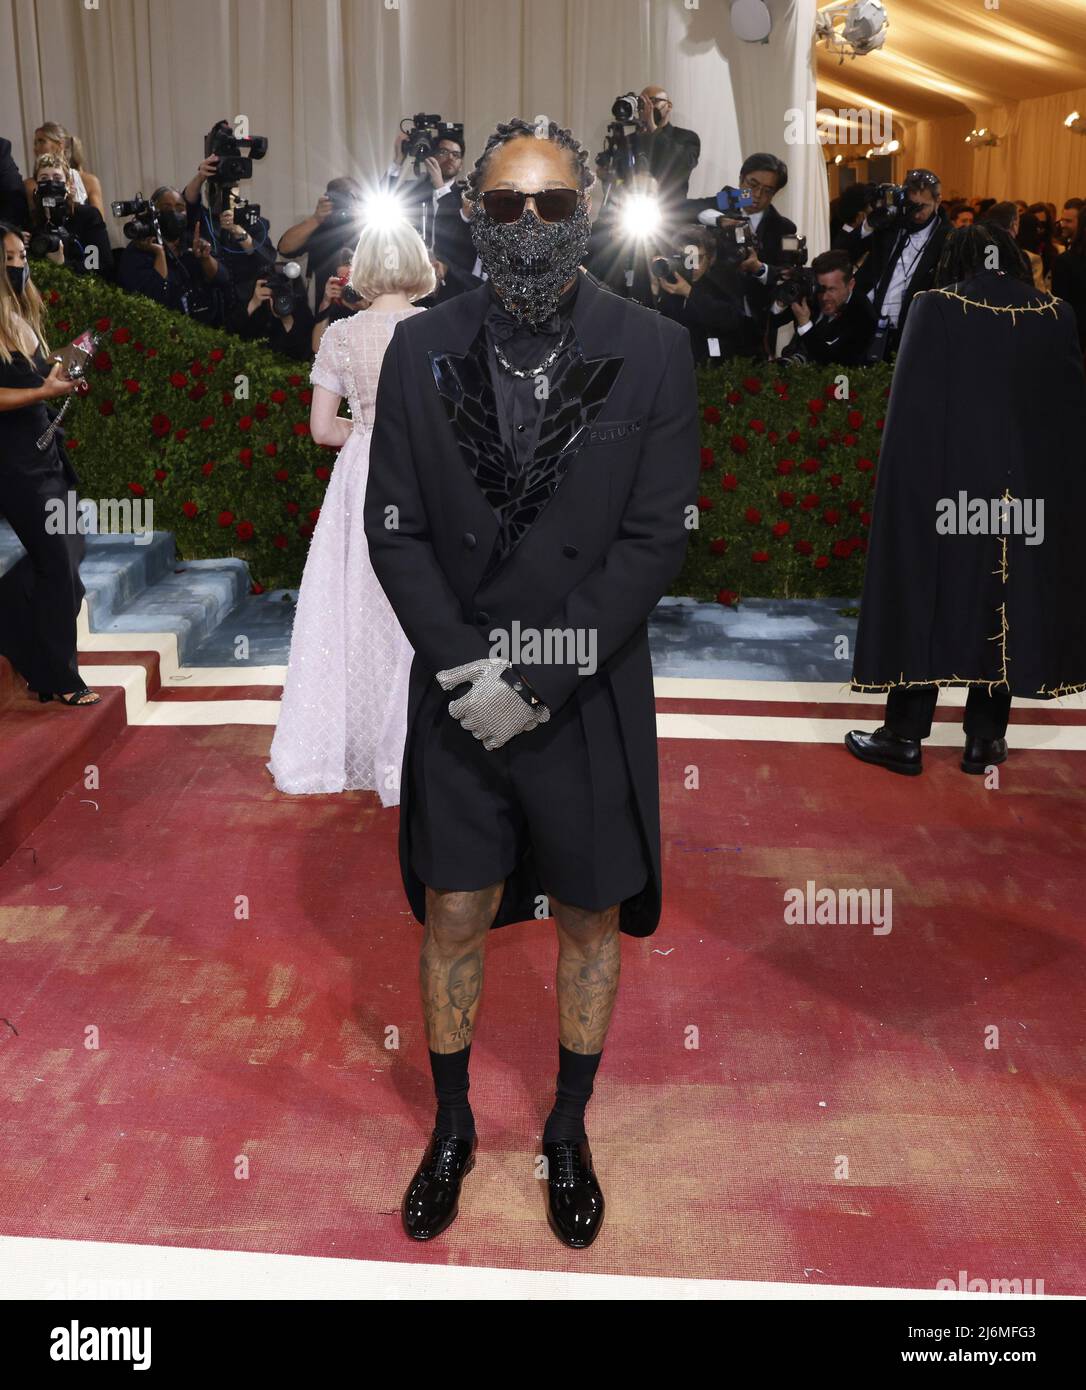 New York, United States. 03rd May, 2022. Future arrives on the red carpet for The Met Gala at The Metropolitan Museum of Art celebrating the Costume Institute opening of 'In America: An Anthology of Fashion' in New York City on Monday, May 2, 2022. Photo by John Angelillo/UPI Credit: UPI/Alamy Live News Stock Photo